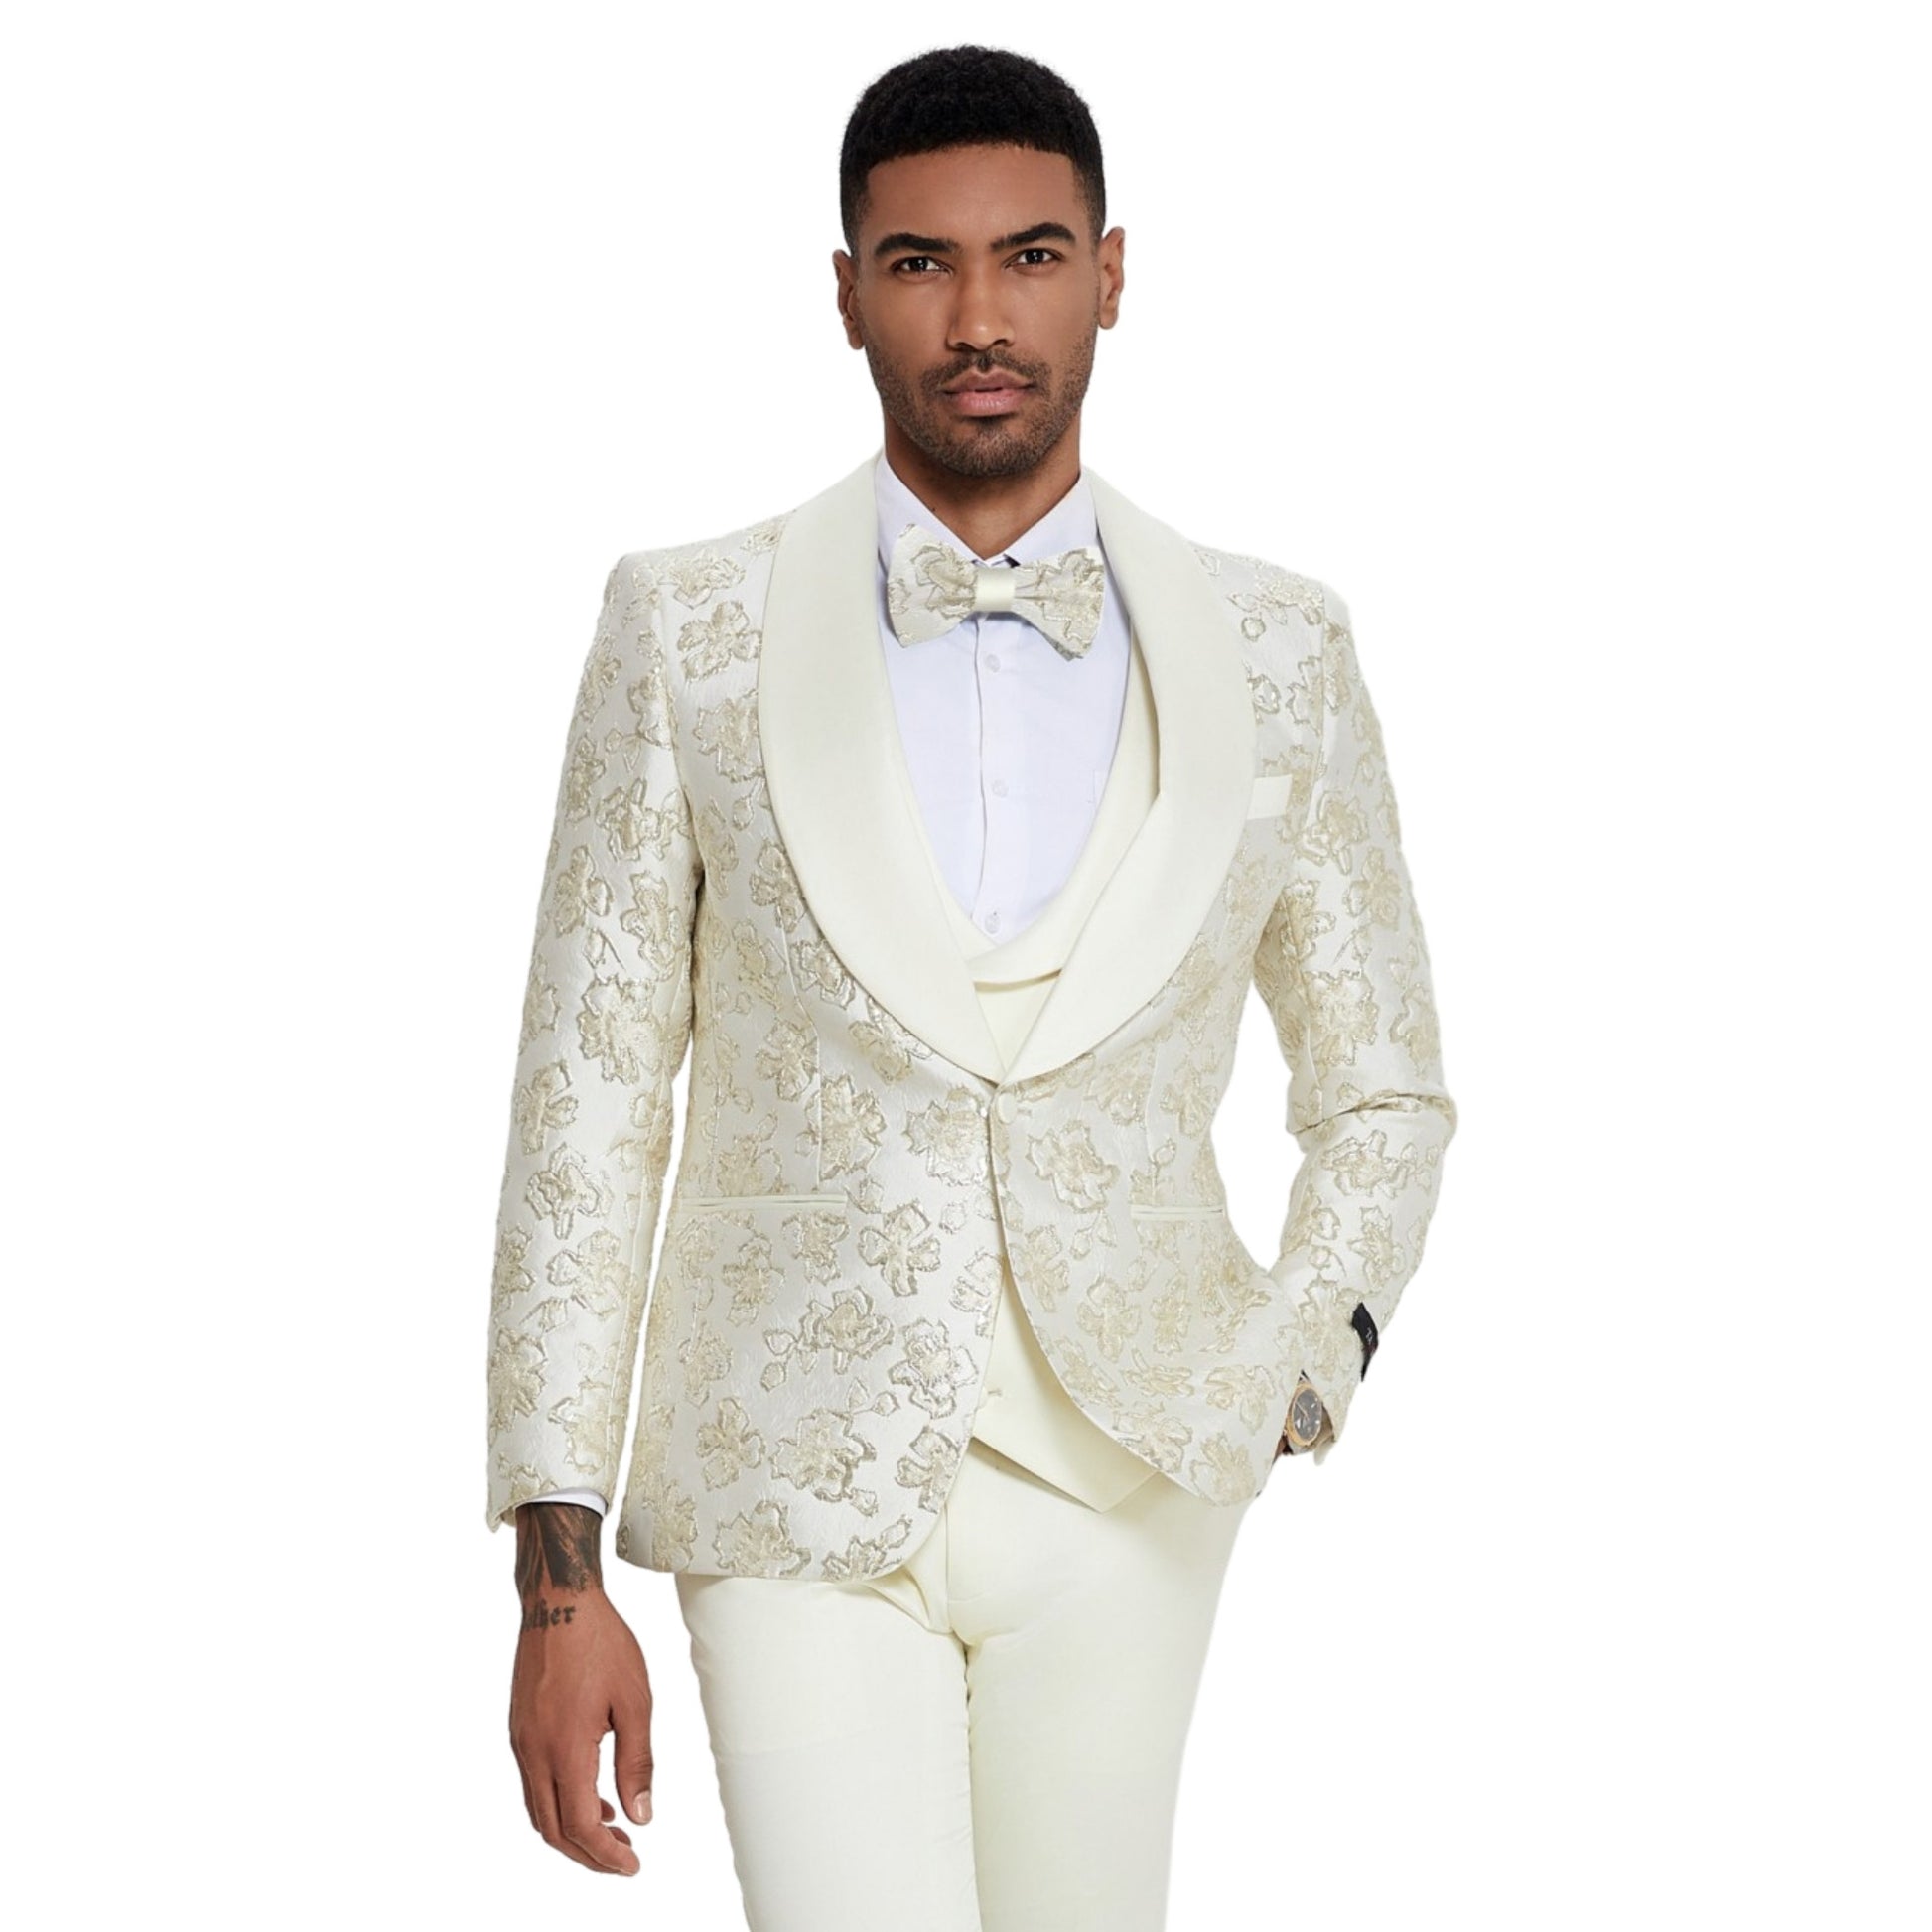 Ivory and Gold Paisley Tuxedo Full Look, Satin Ivory Pants Detail, Ivory Satin Shawl Lapels on Jacket, Elegant Ivory Vest with Satin Lapels, Detailed Ivory Buttons, Slim Fit High-End Suit, Ivory Gold Paisley Bowtie Match.